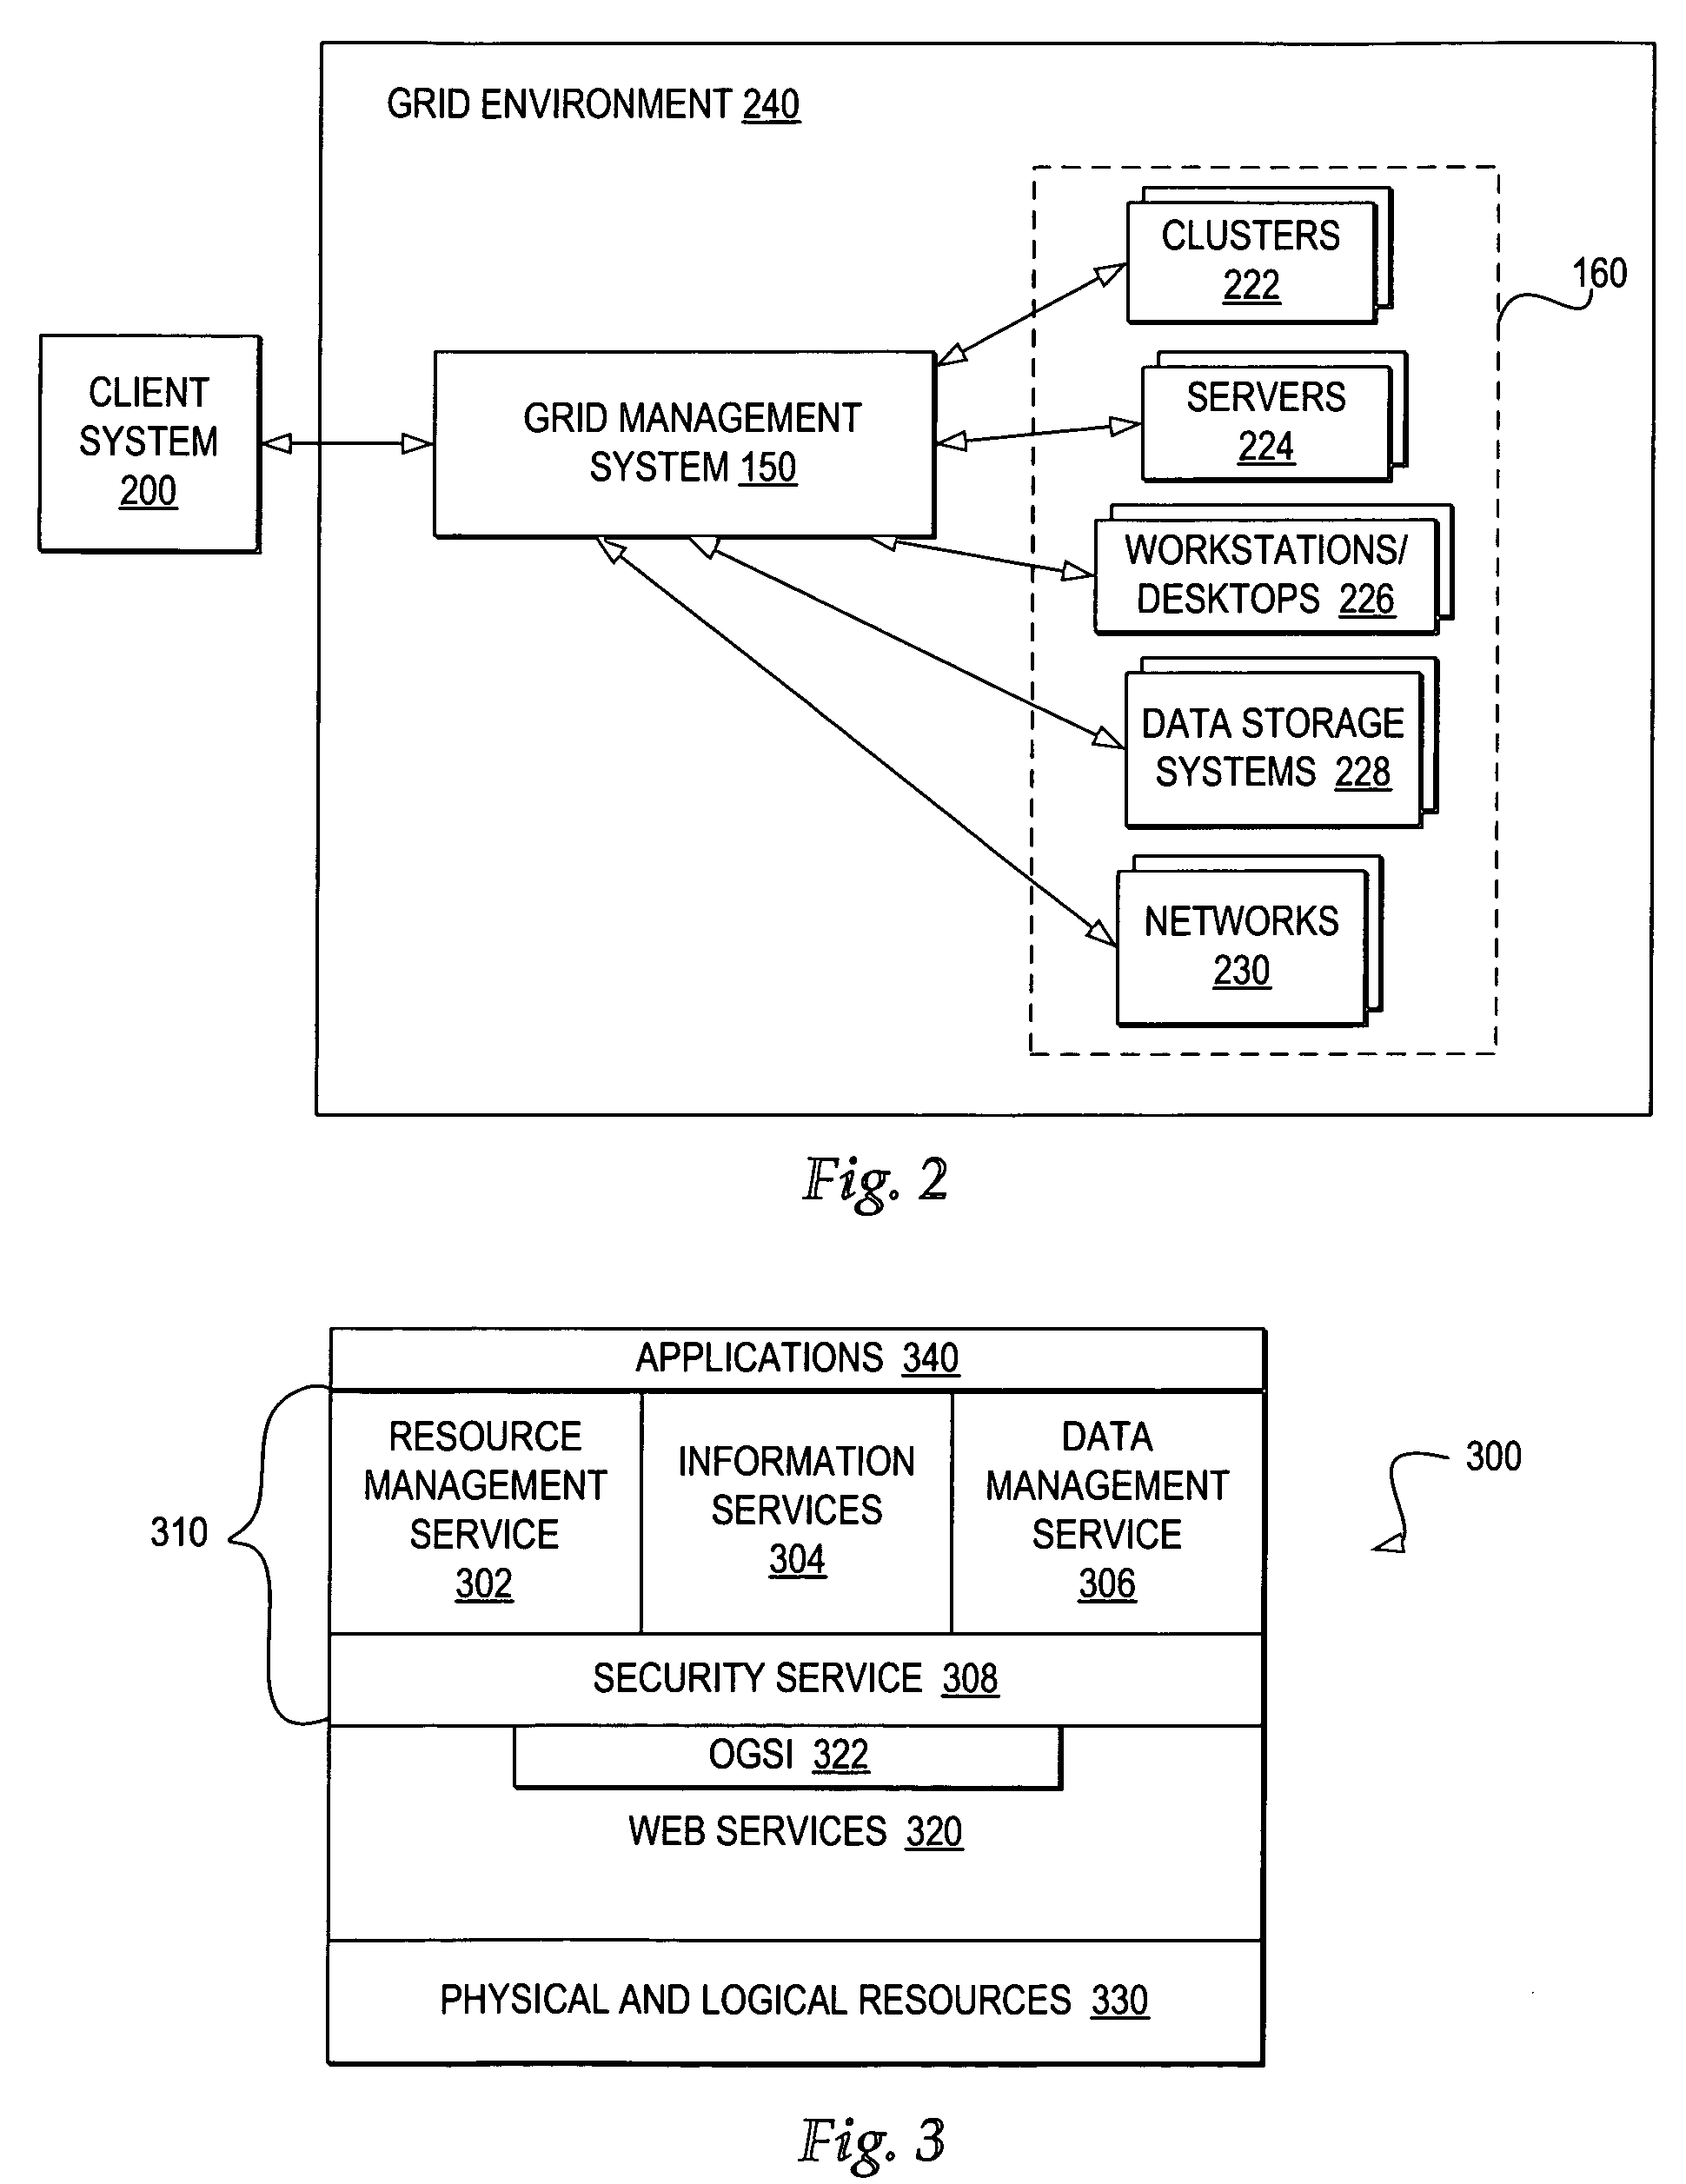 Managing analysis of a degraded service in a grid environment